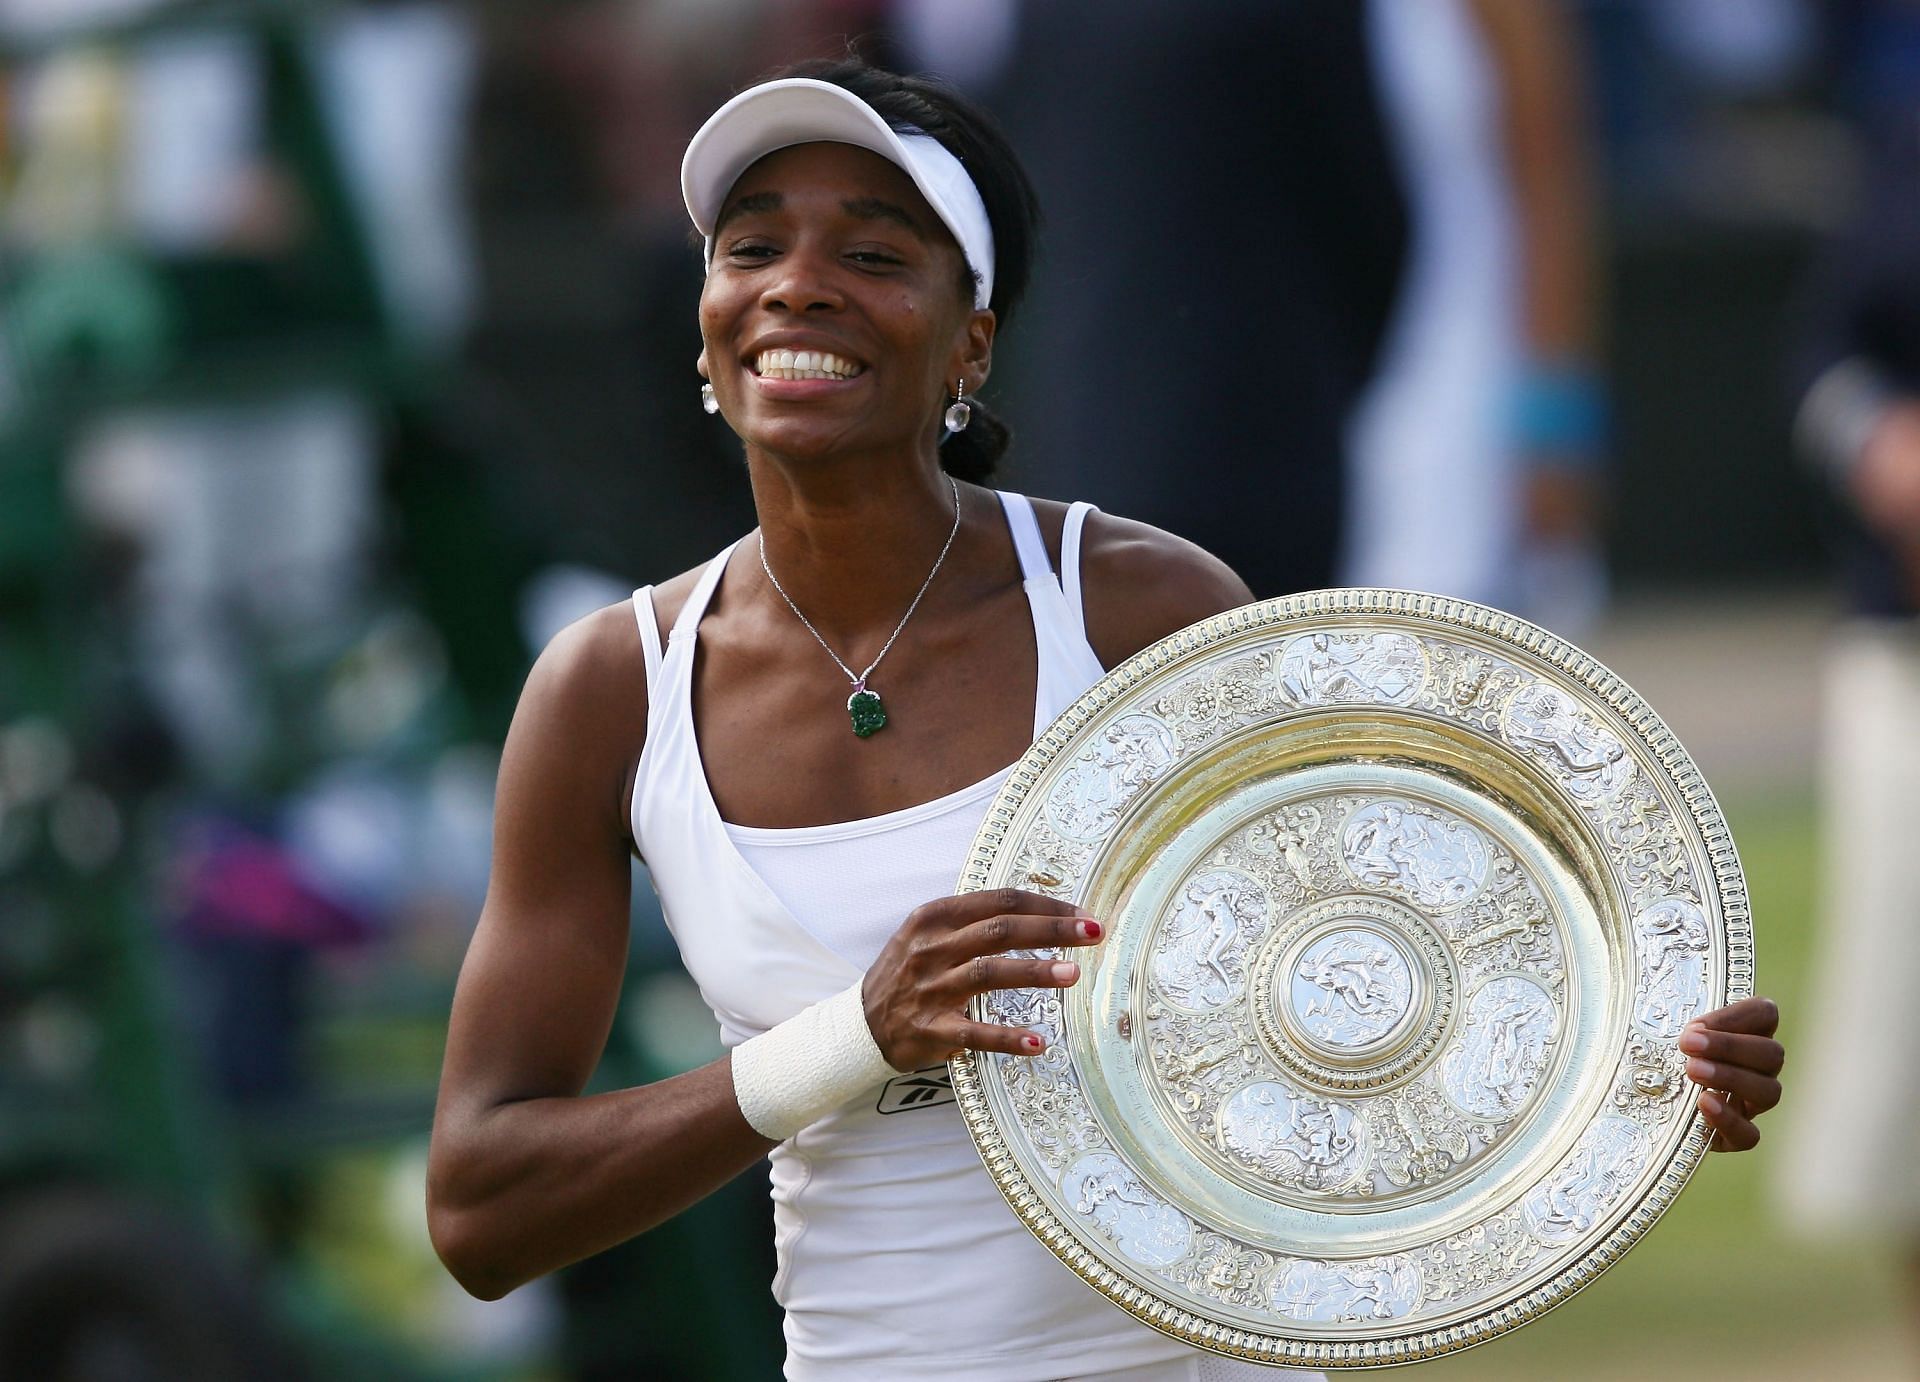 In 2007, Venus Williams became the first woman to colleact equal prize money at Wimbledon